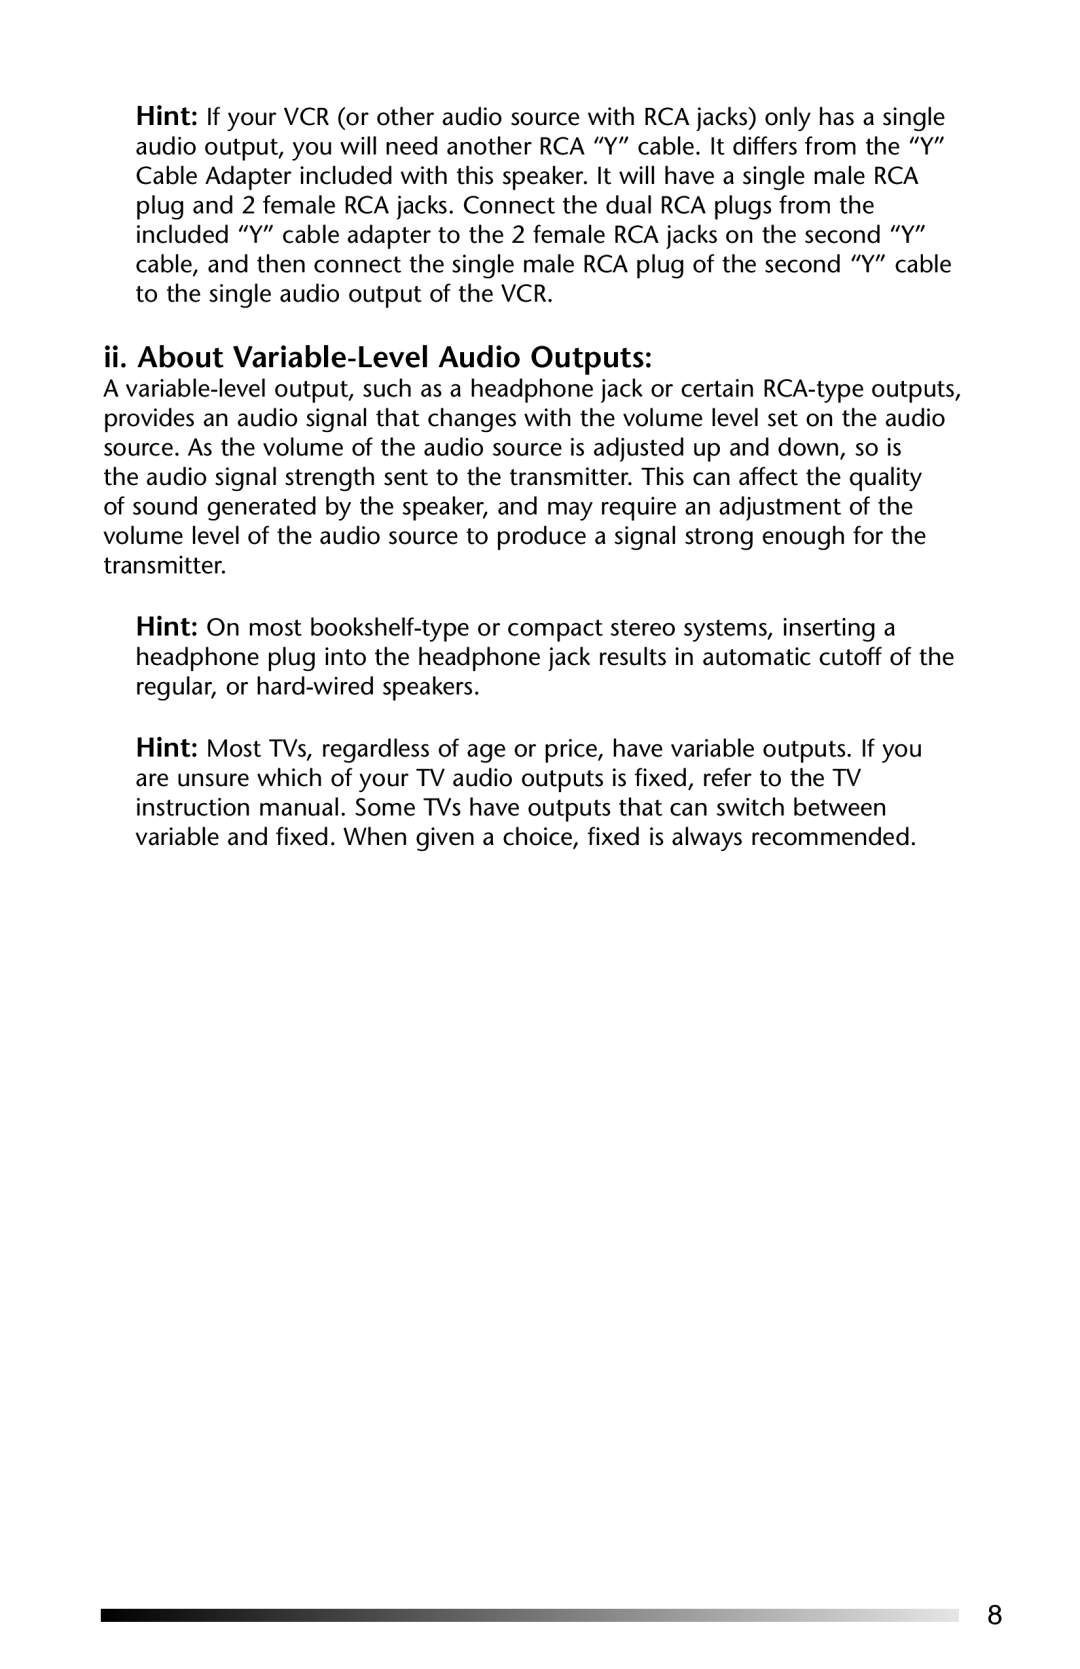 Acoustic Research AW-811 operation manual ii. About Variable-LevelAudio Outputs 